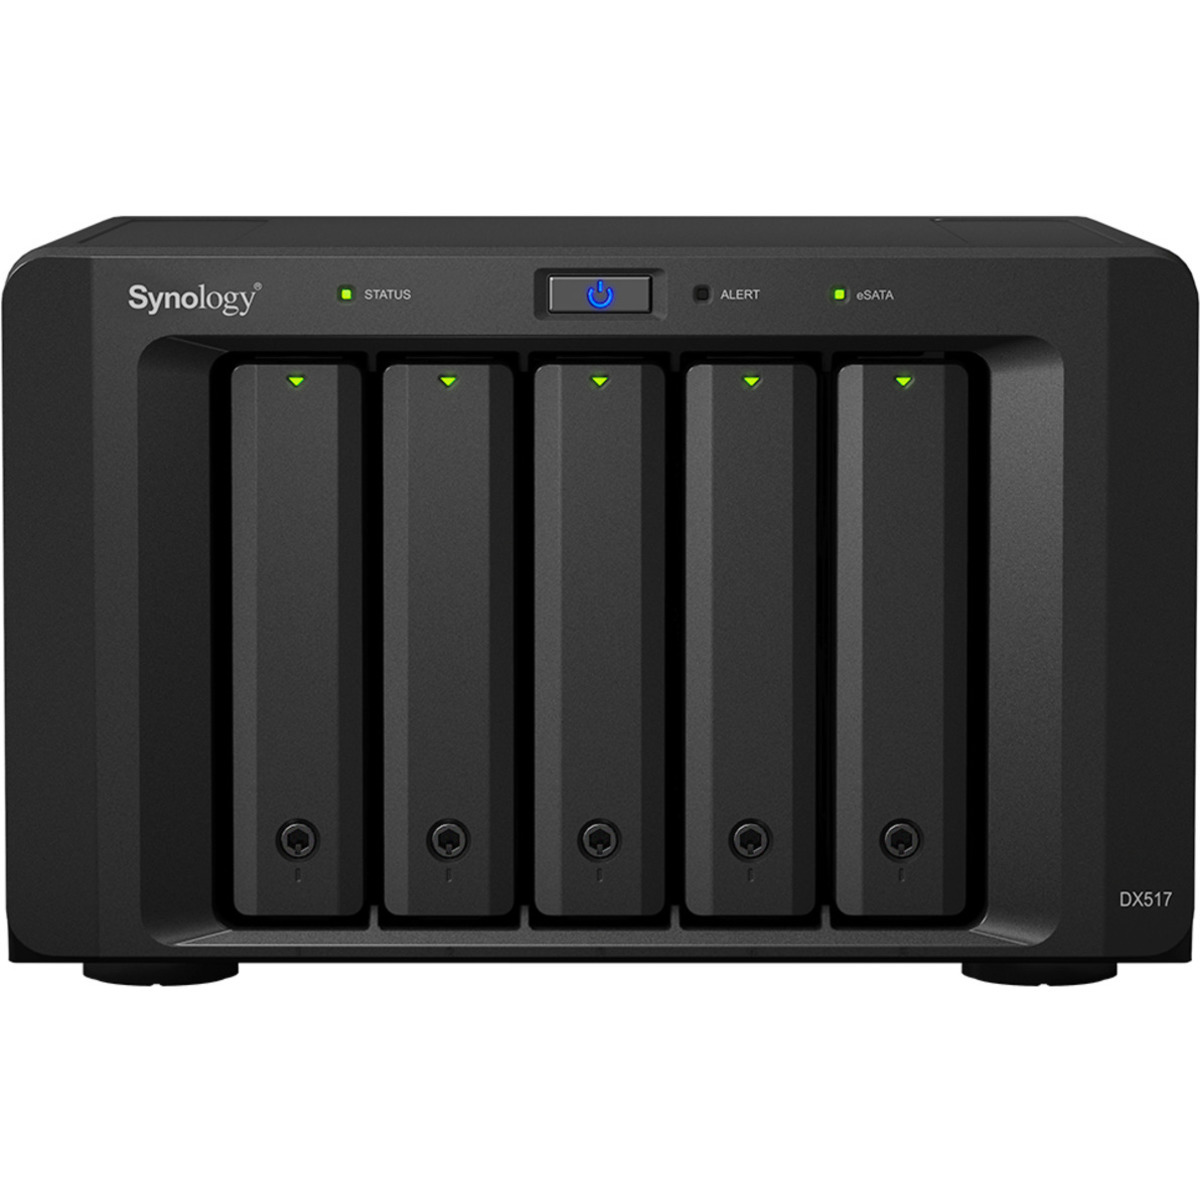 buy $3687 Synology DX517 40tb Desktop Expansion Enclosure 5x8000gb Samsung 870 QVO MZ-77Q8T0 2.5 SATA 6Gb/s SSD CONSUMER Class Drives Installed - Burn-In Tested - nas headquarters buy network attached storage server device das new raid-5 free shipping usa DX517